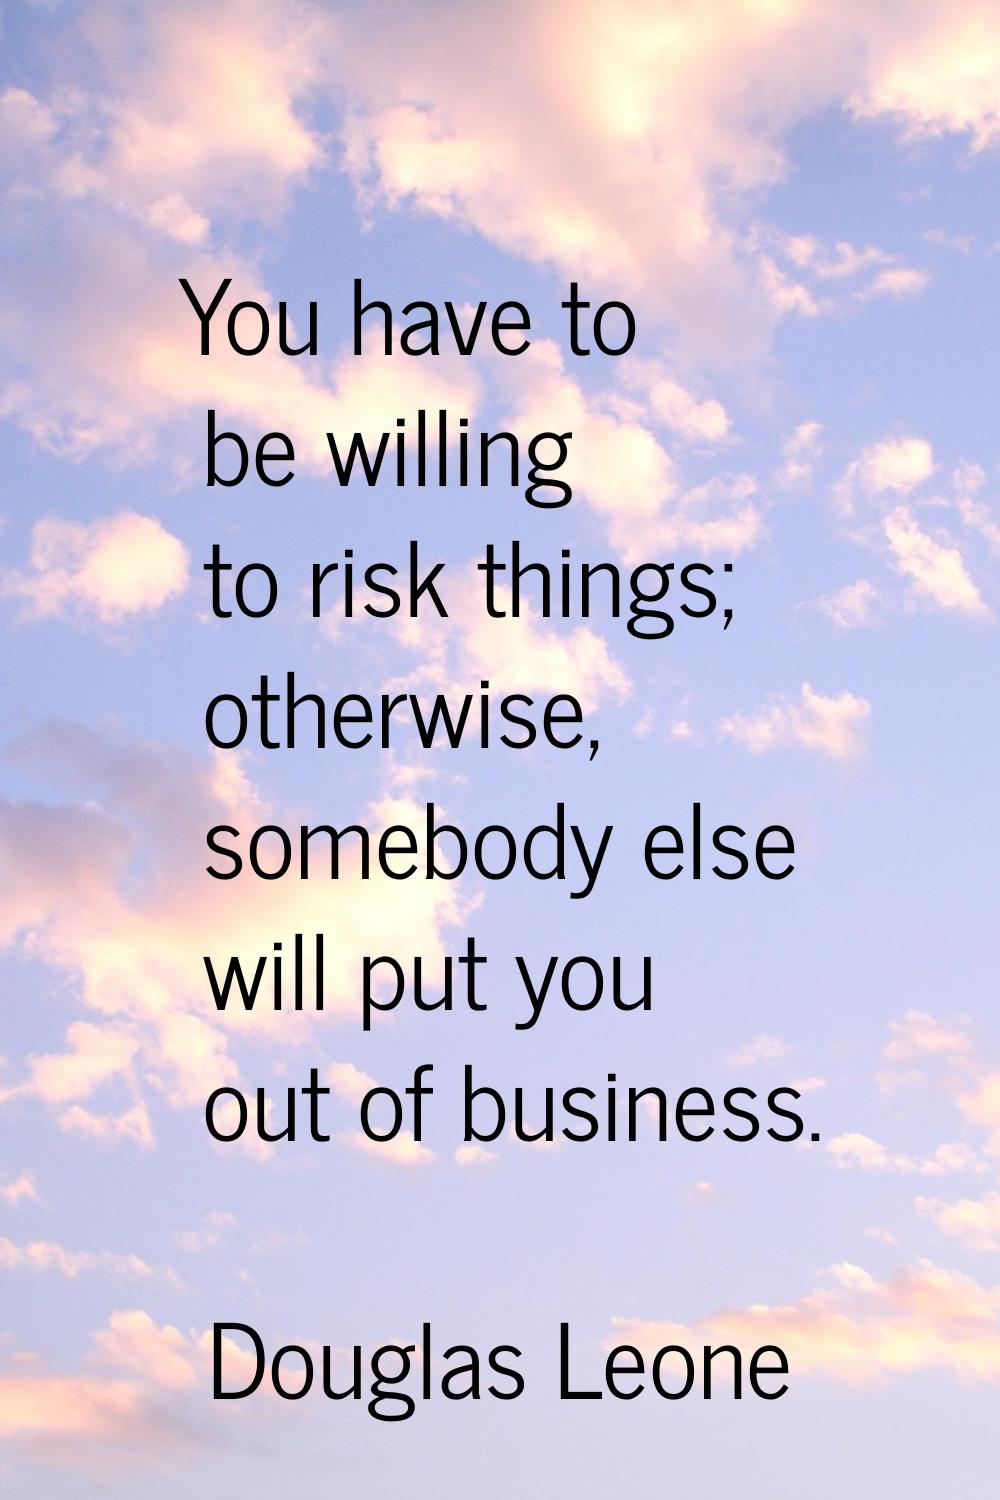 You have to be willing to risk things; otherwise, somebody else will put you out of business.